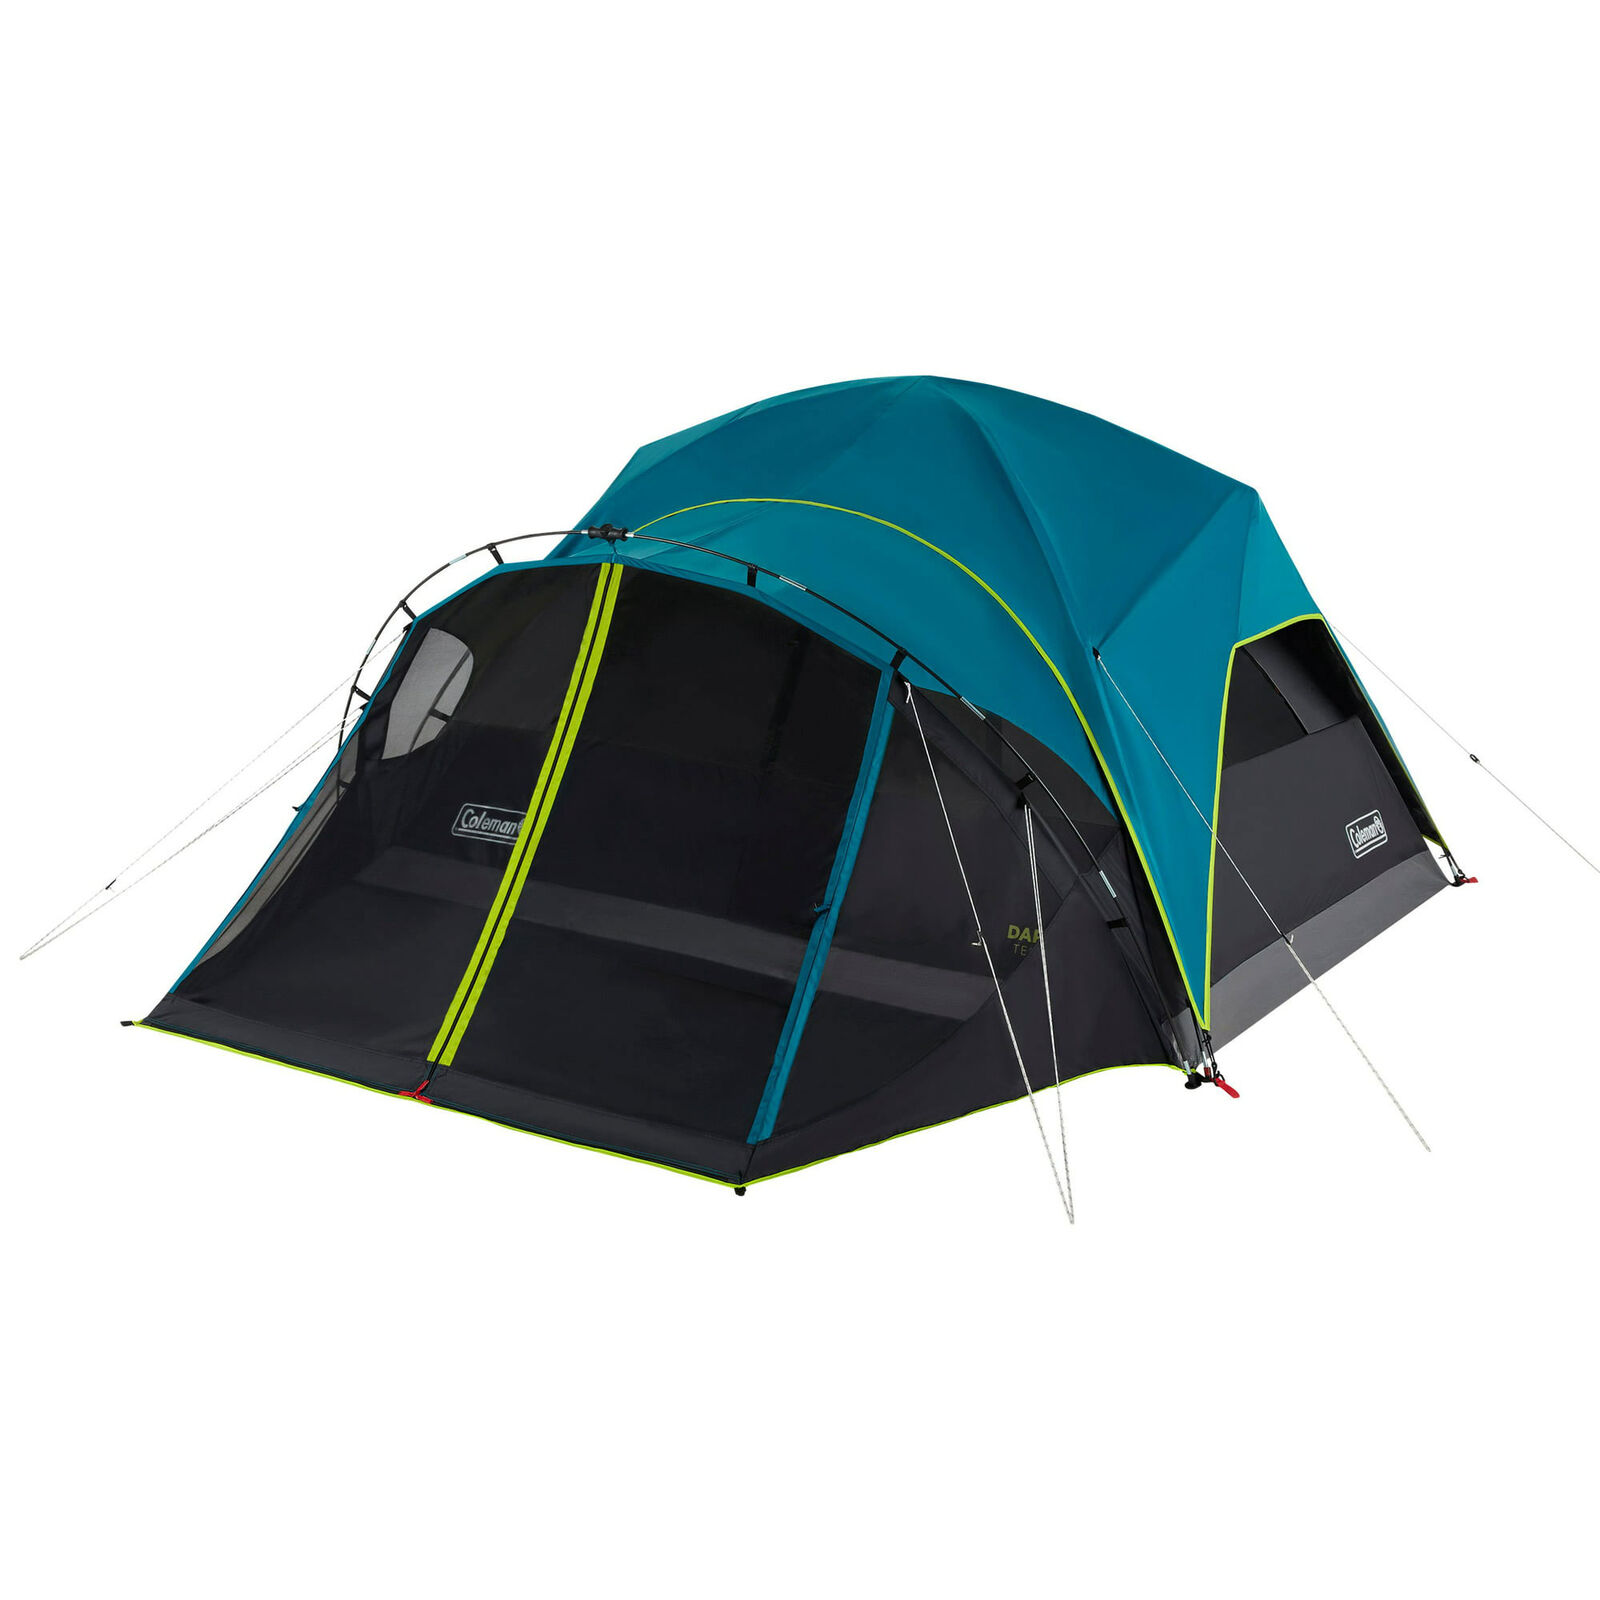 Coleman 4 Person Dark Room Dome Camping Tent with Screen Room, Blue (Used)